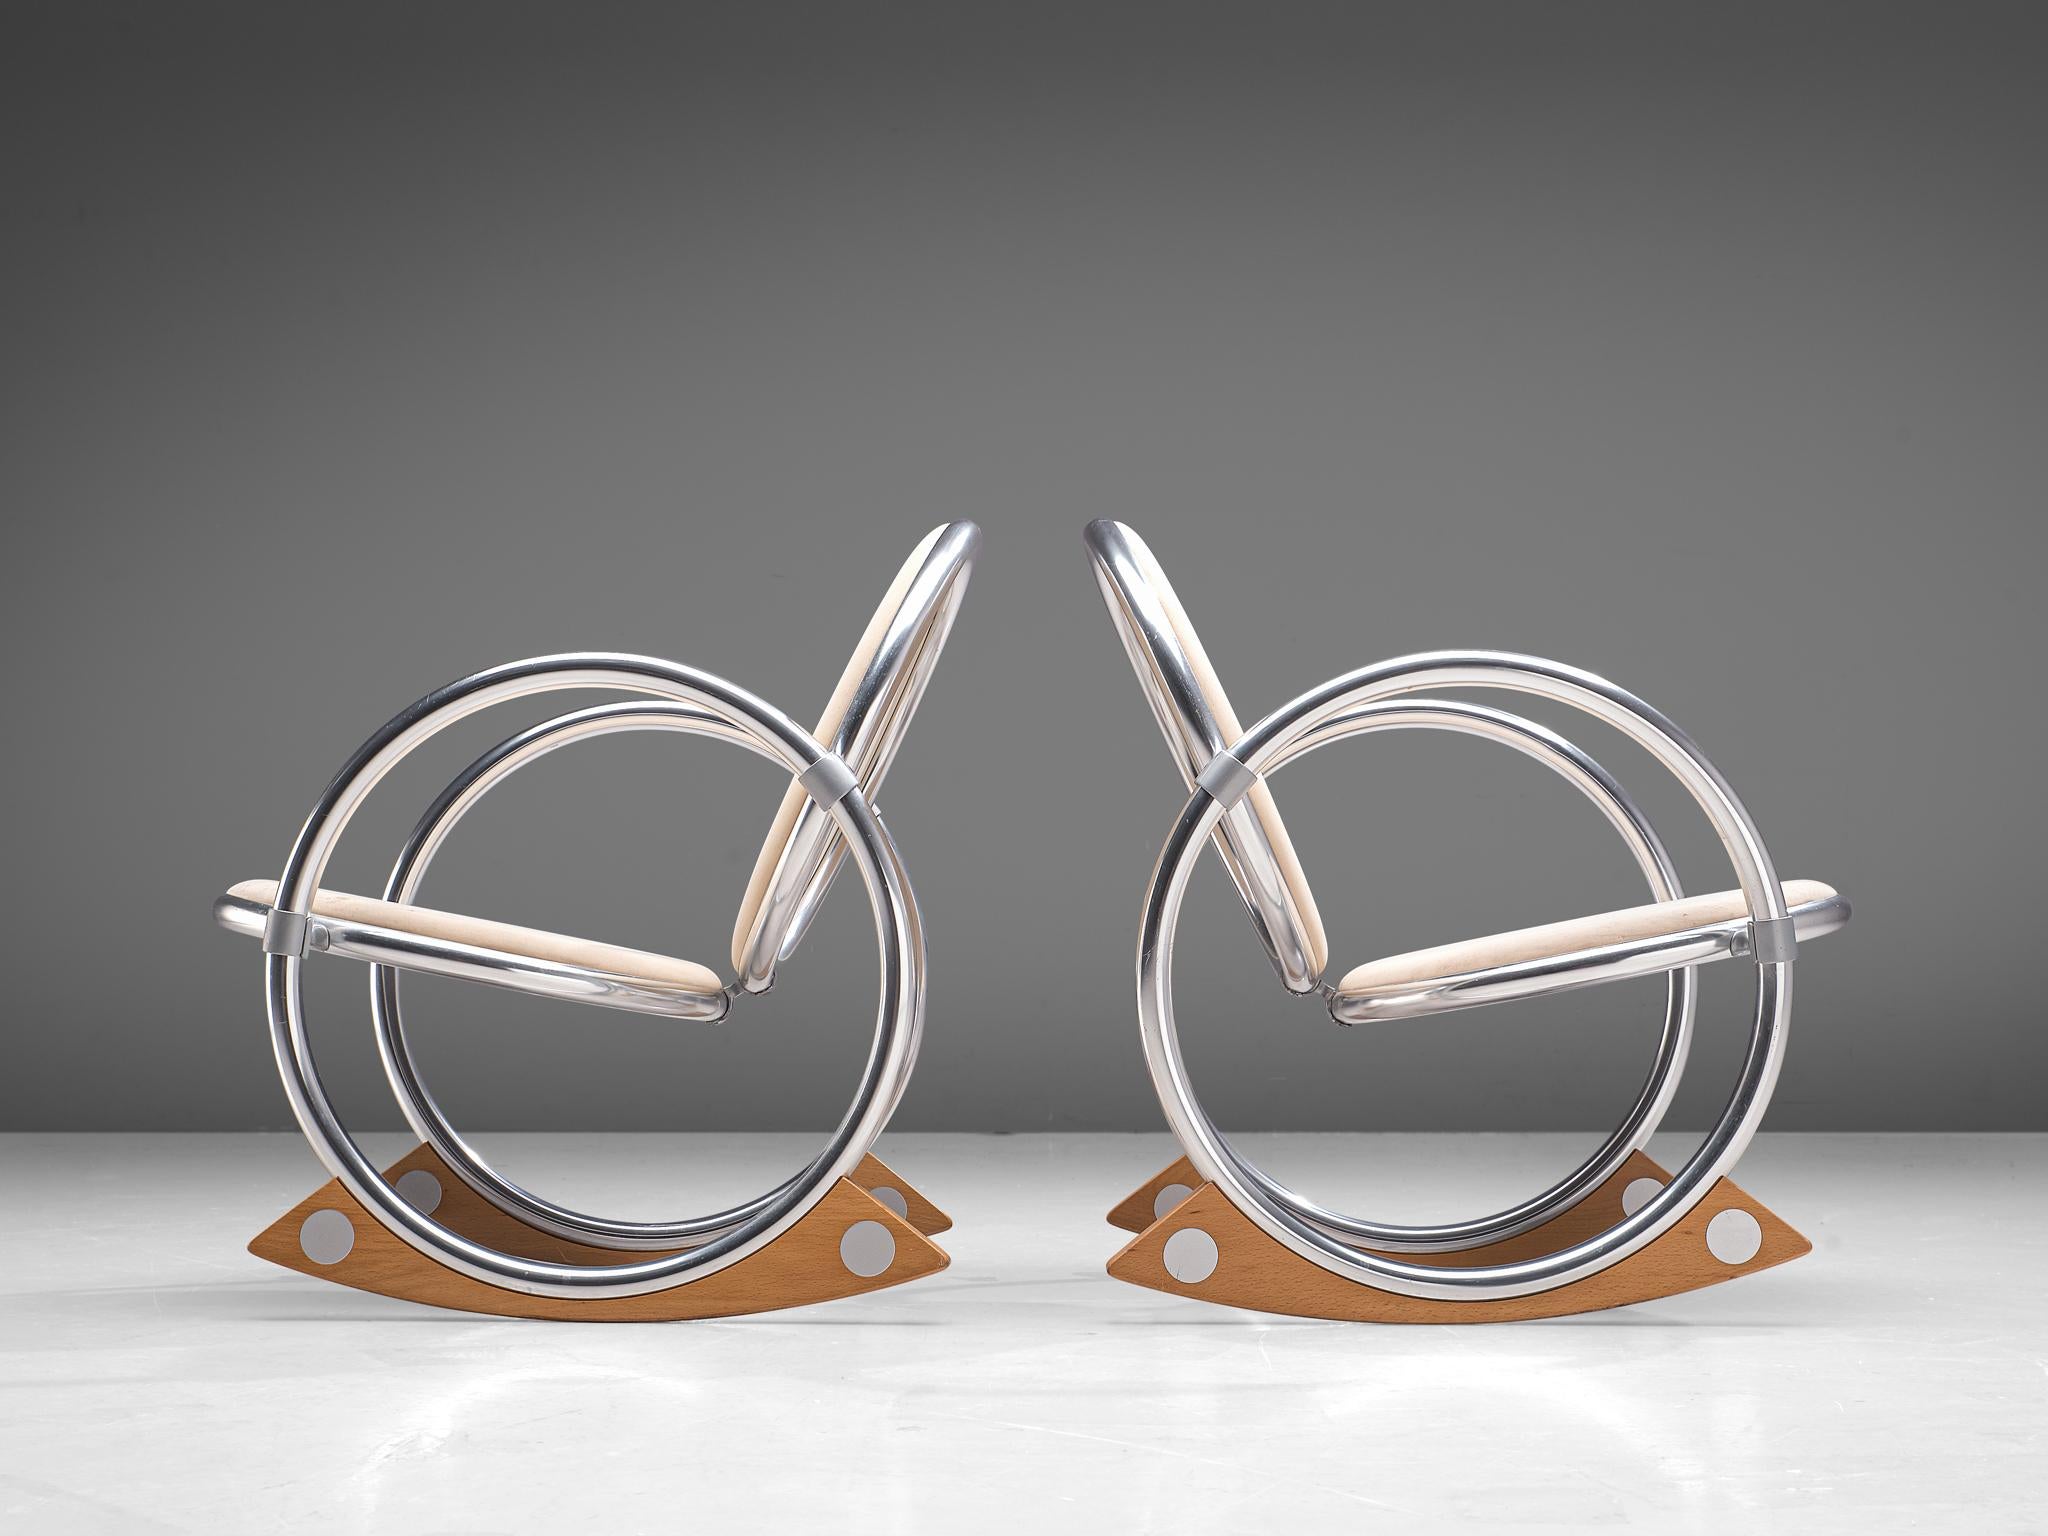 Verner Panton for Ycami Edizioni/Italy, pair of 'Dondolo' rocking chairs, aluminum, beech and fabric, Italy, 1990s.

Postmodern pair of rocking chairs, designed by Verner Panton. The chairs consist of four tubular circles. The two larger circles